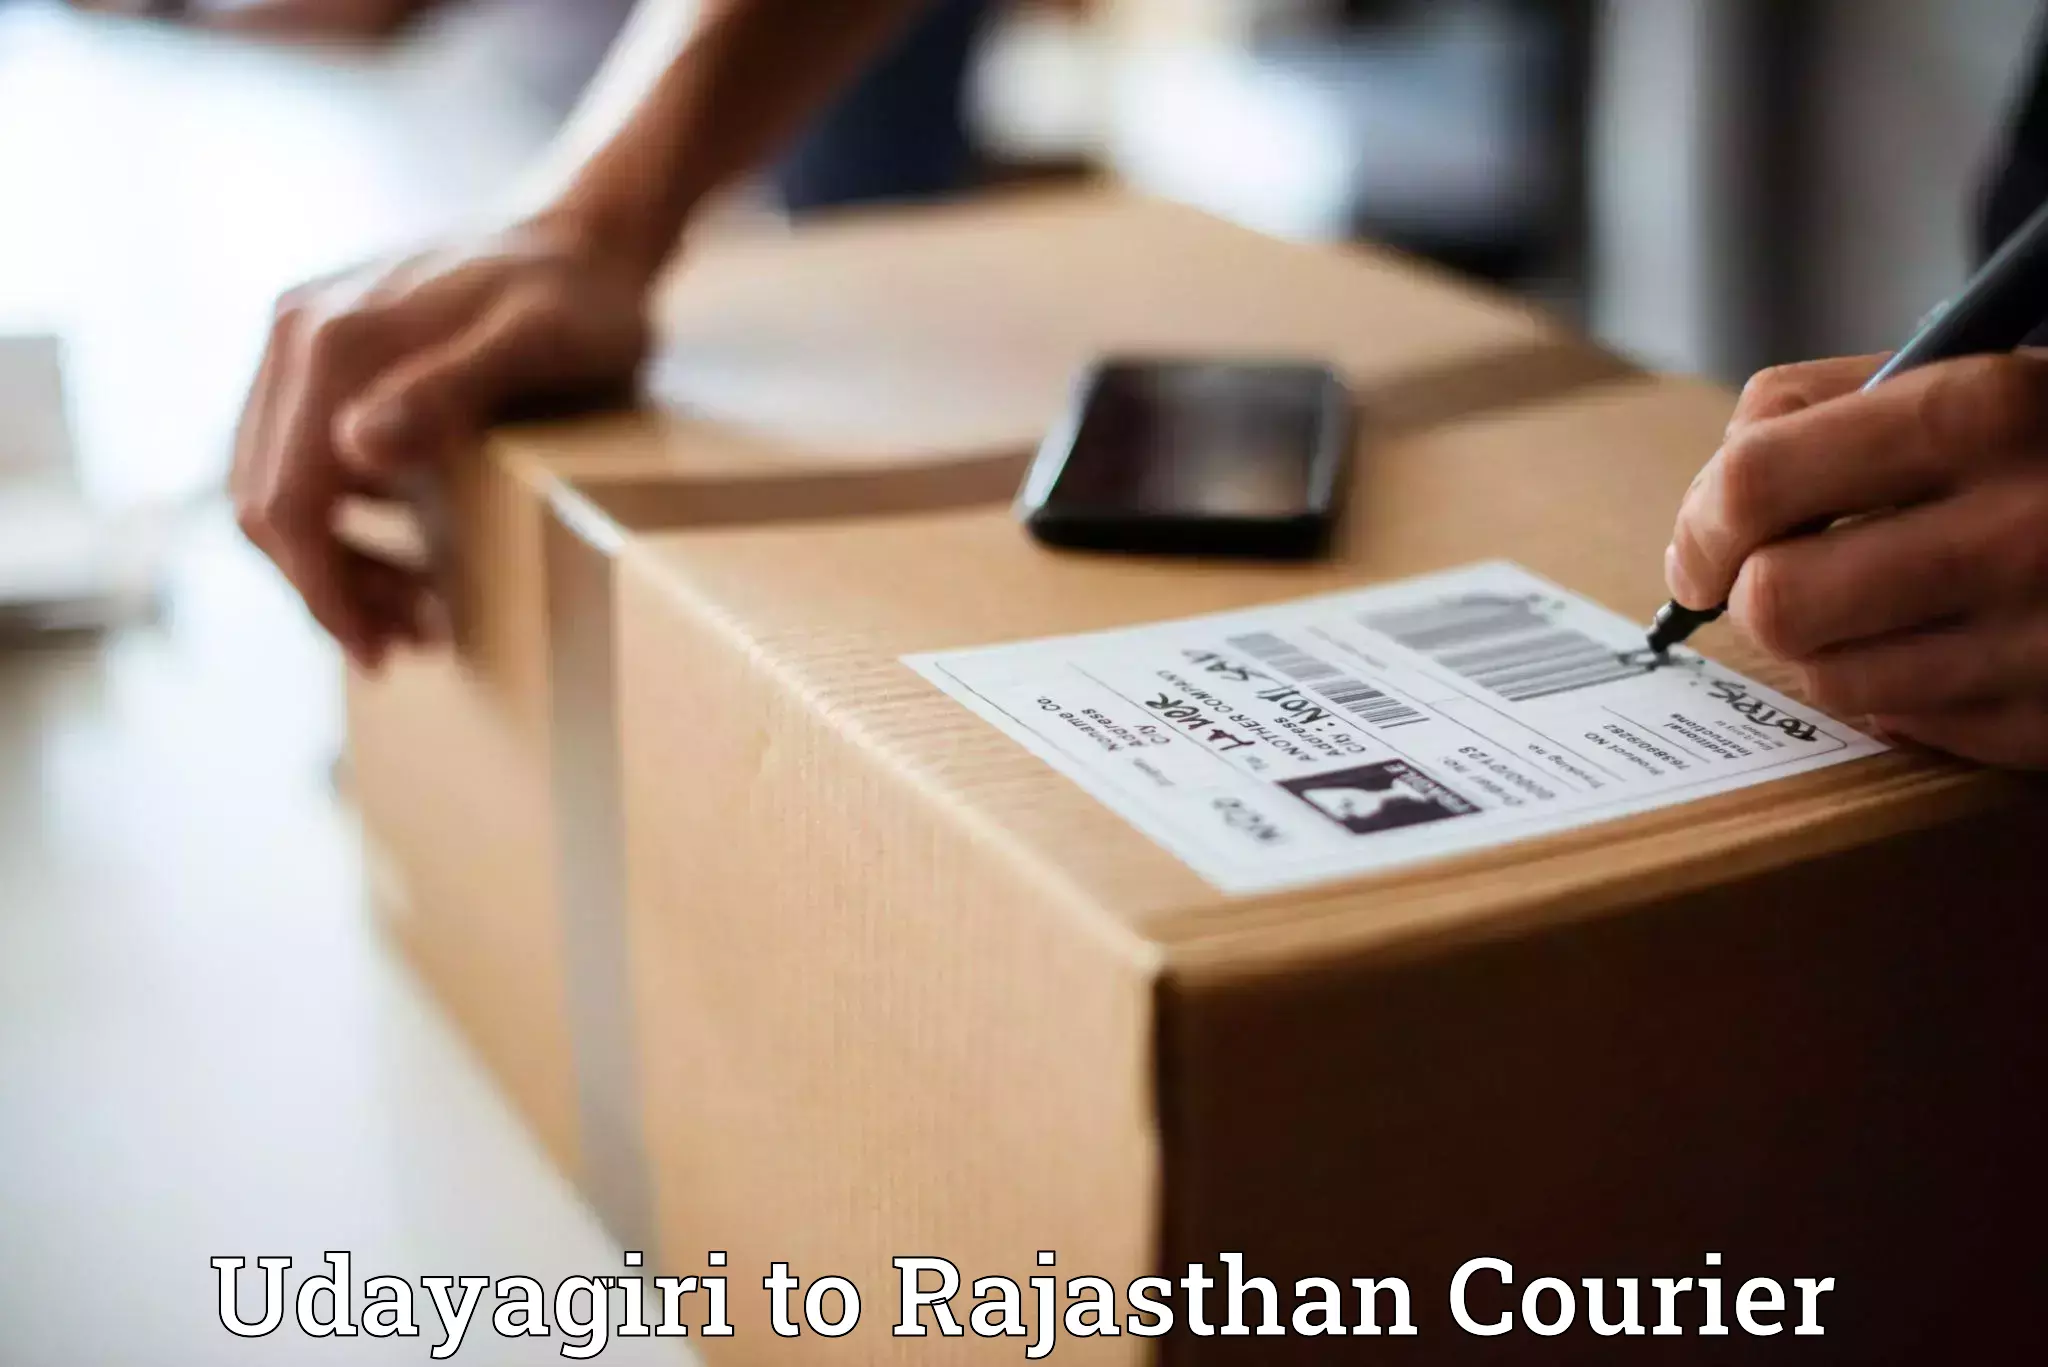 Next-day delivery options in Udayagiri to Rajgarh Rajasthan